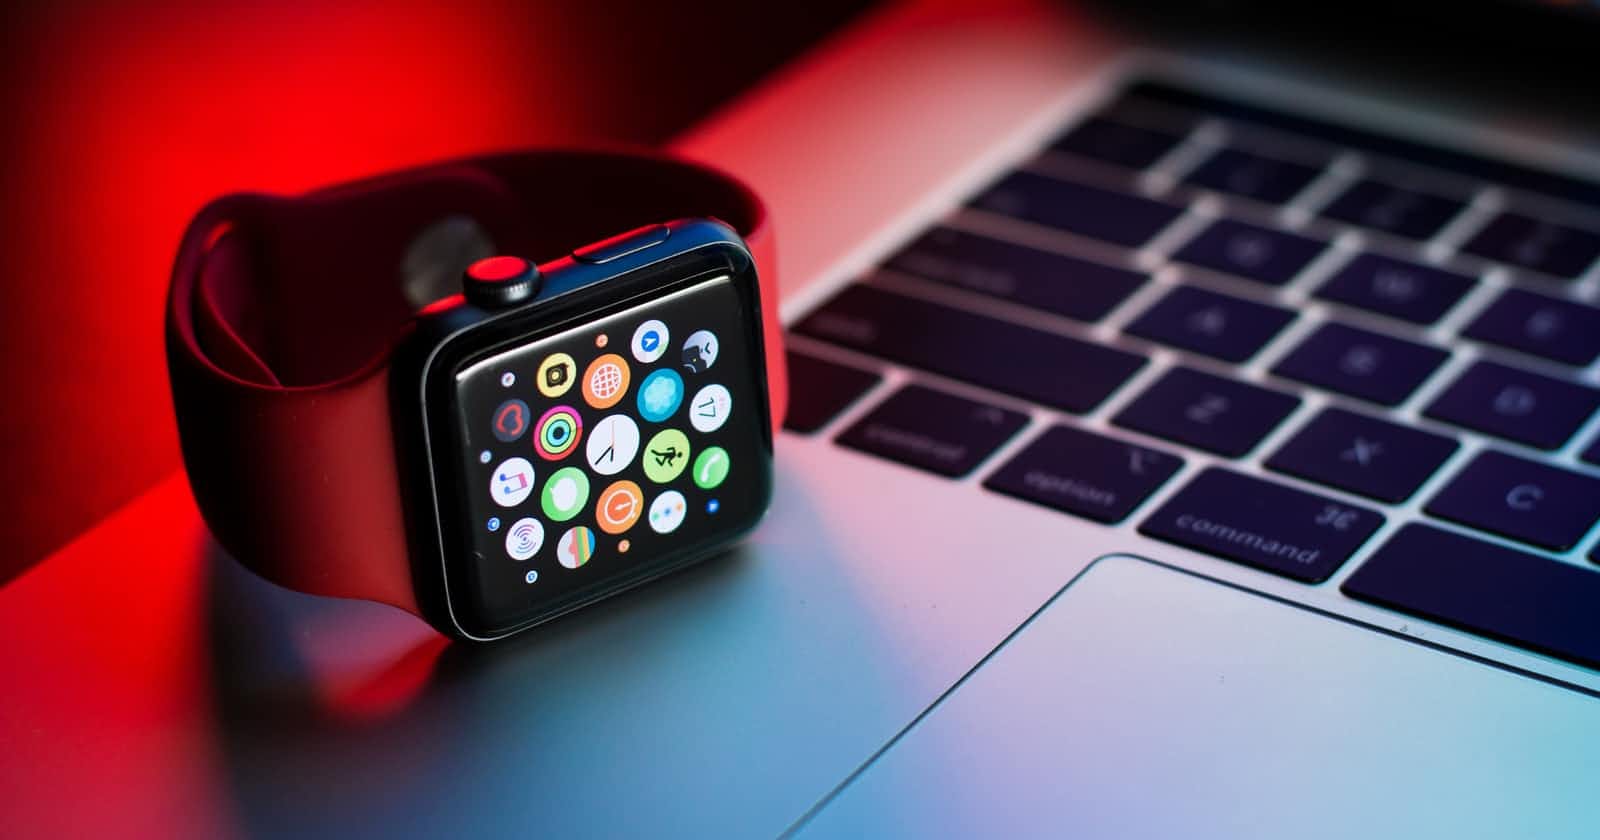 watchOS articles from Apple